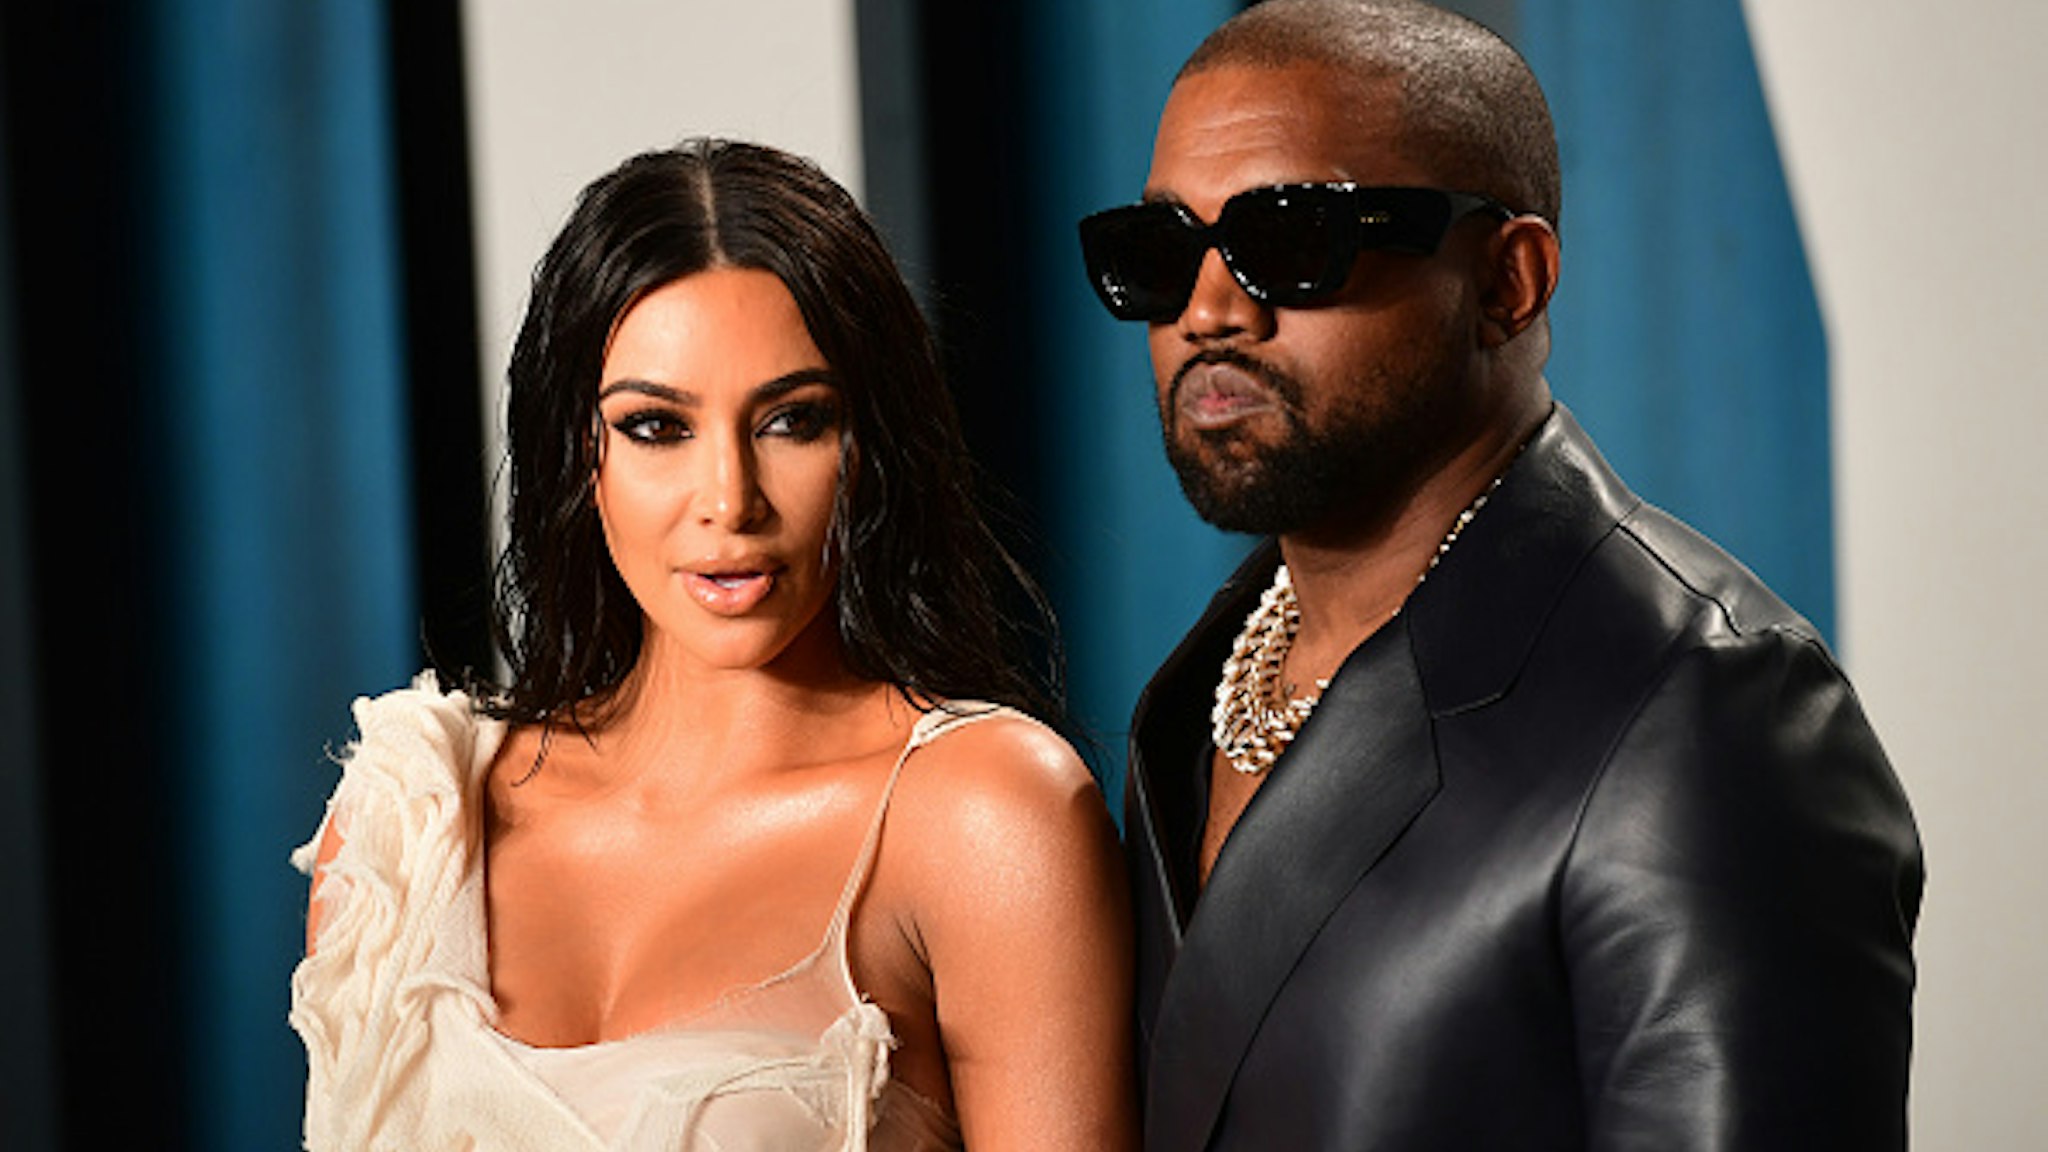 Kim Kardashian and Kanye West attending the Vanity Fair Oscar Party held at the Wallis Annenberg Center for the Performing Arts in Beverly Hills, Los Angeles, California, USA.